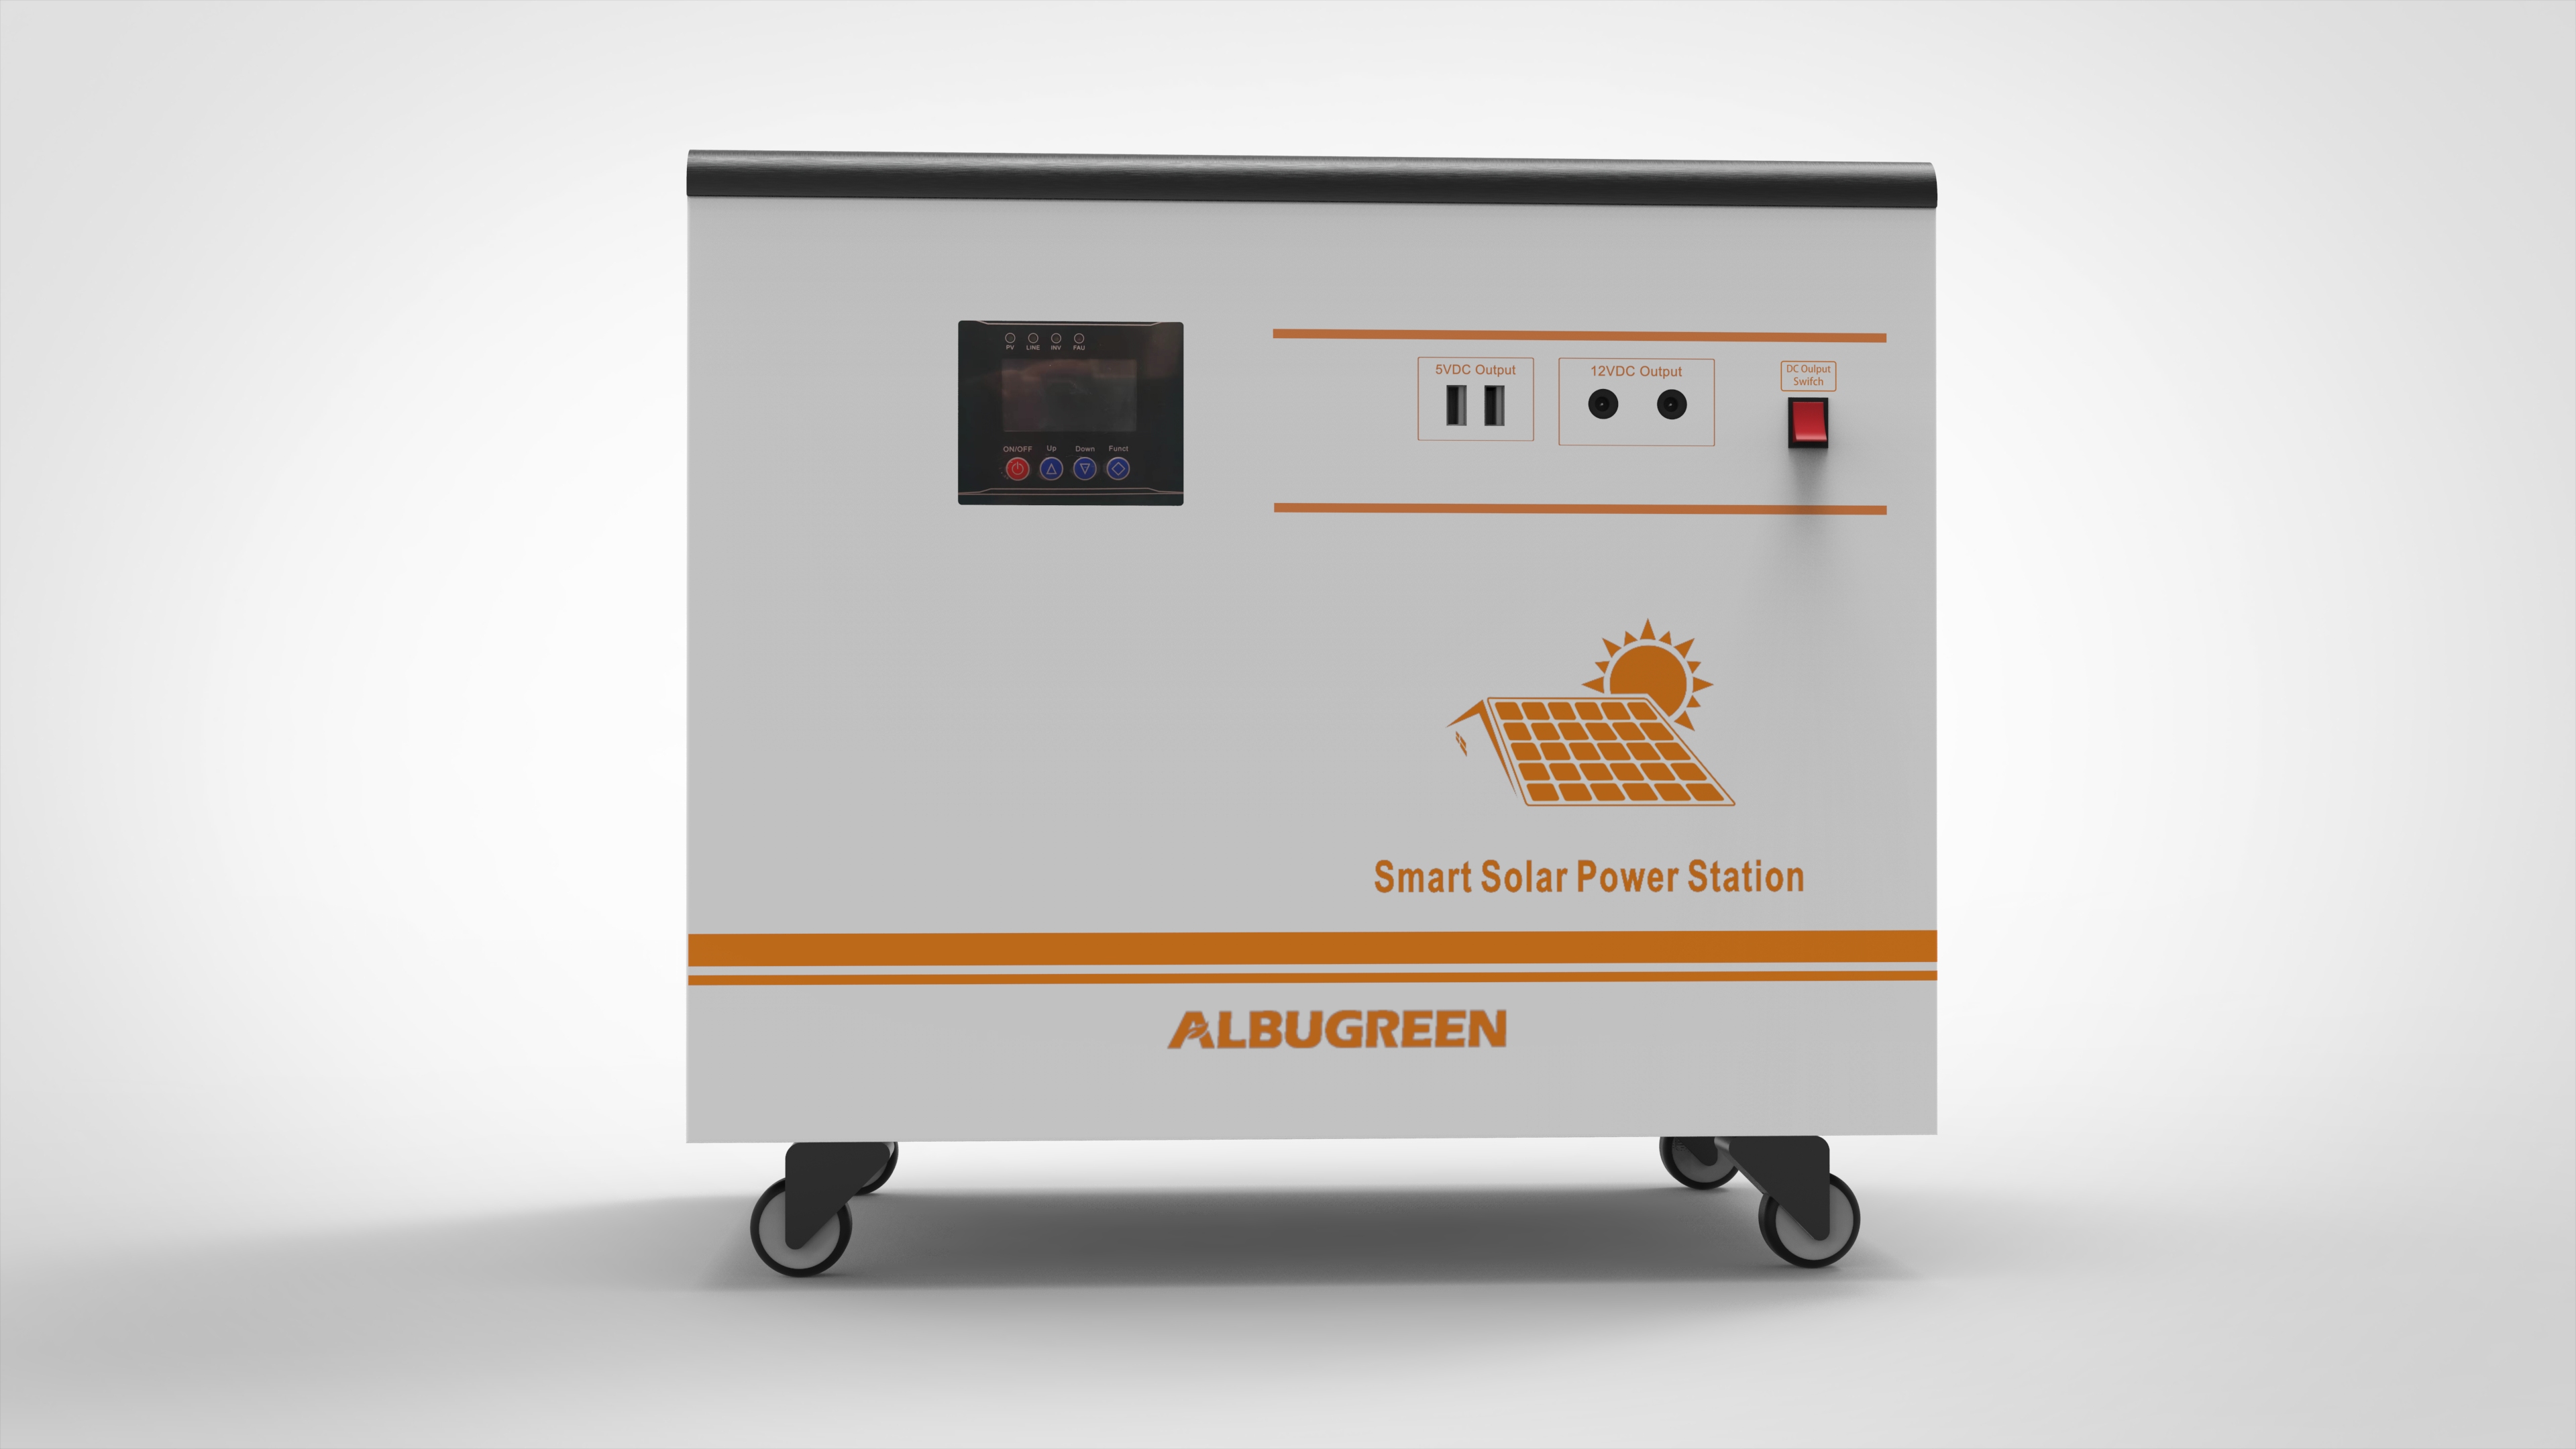 3000w 220v Fastest in One Solar Power System for Campers